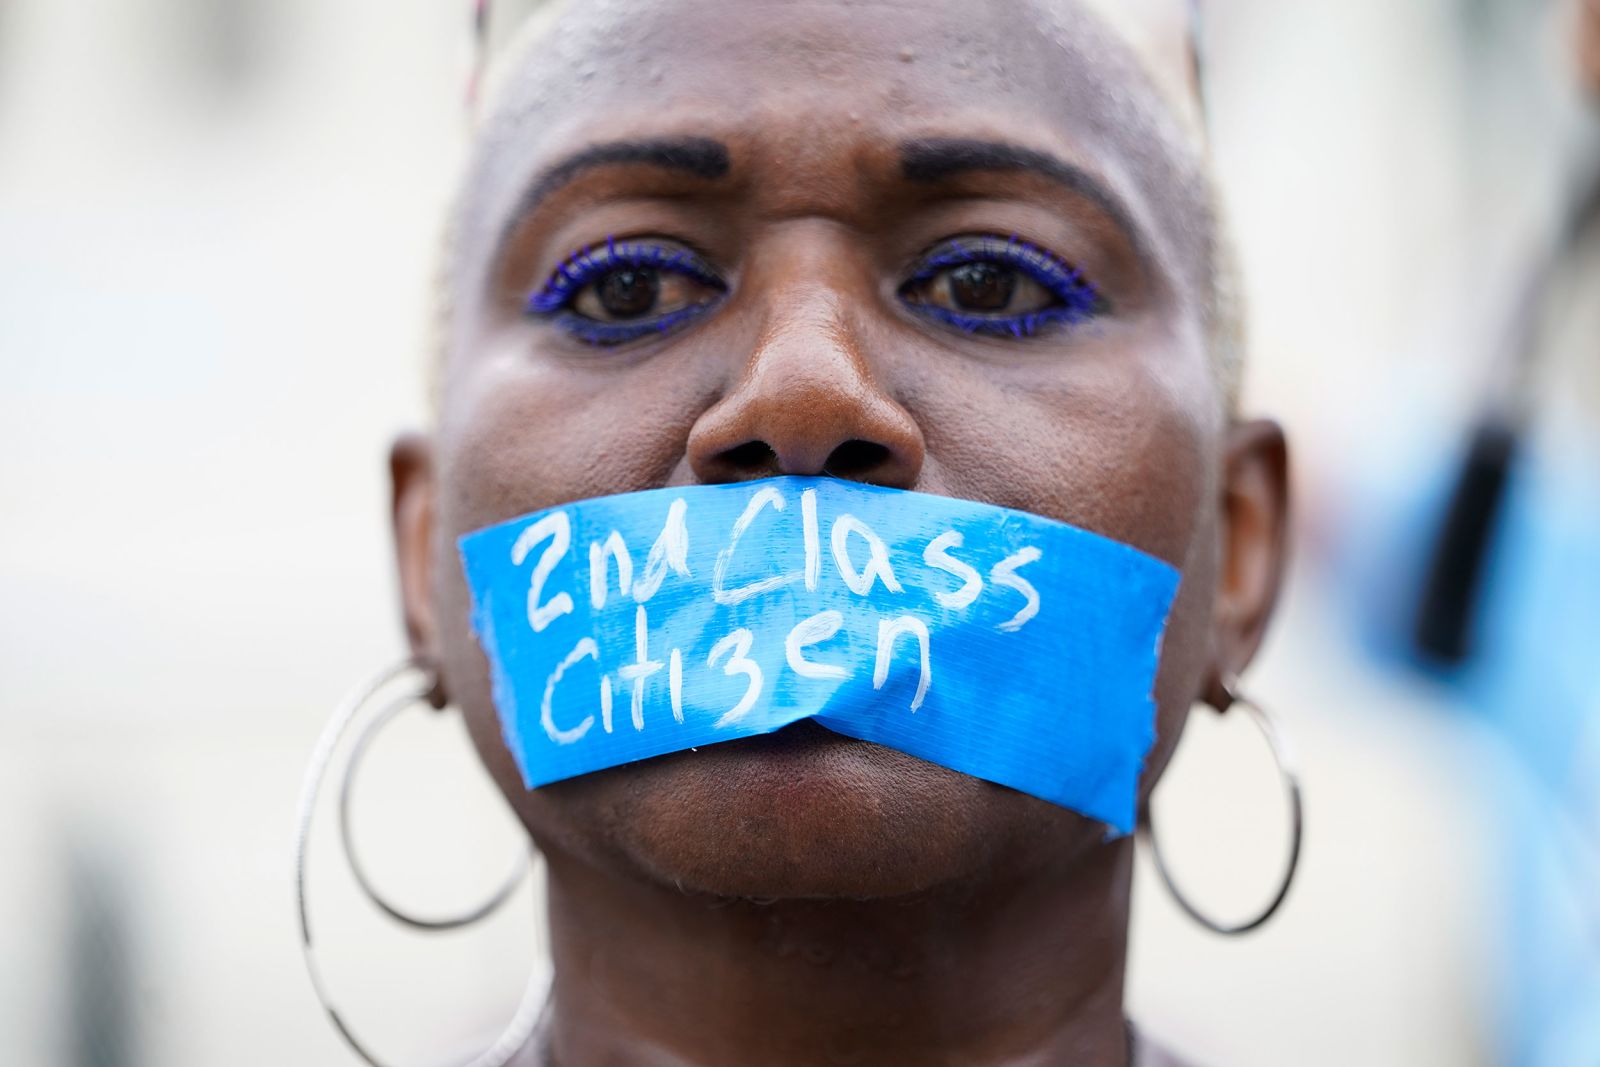 A pro-abortion rights activist wears tape across their mouth reading "2nd Class Citizen" in Washington, DC, on Friday. 